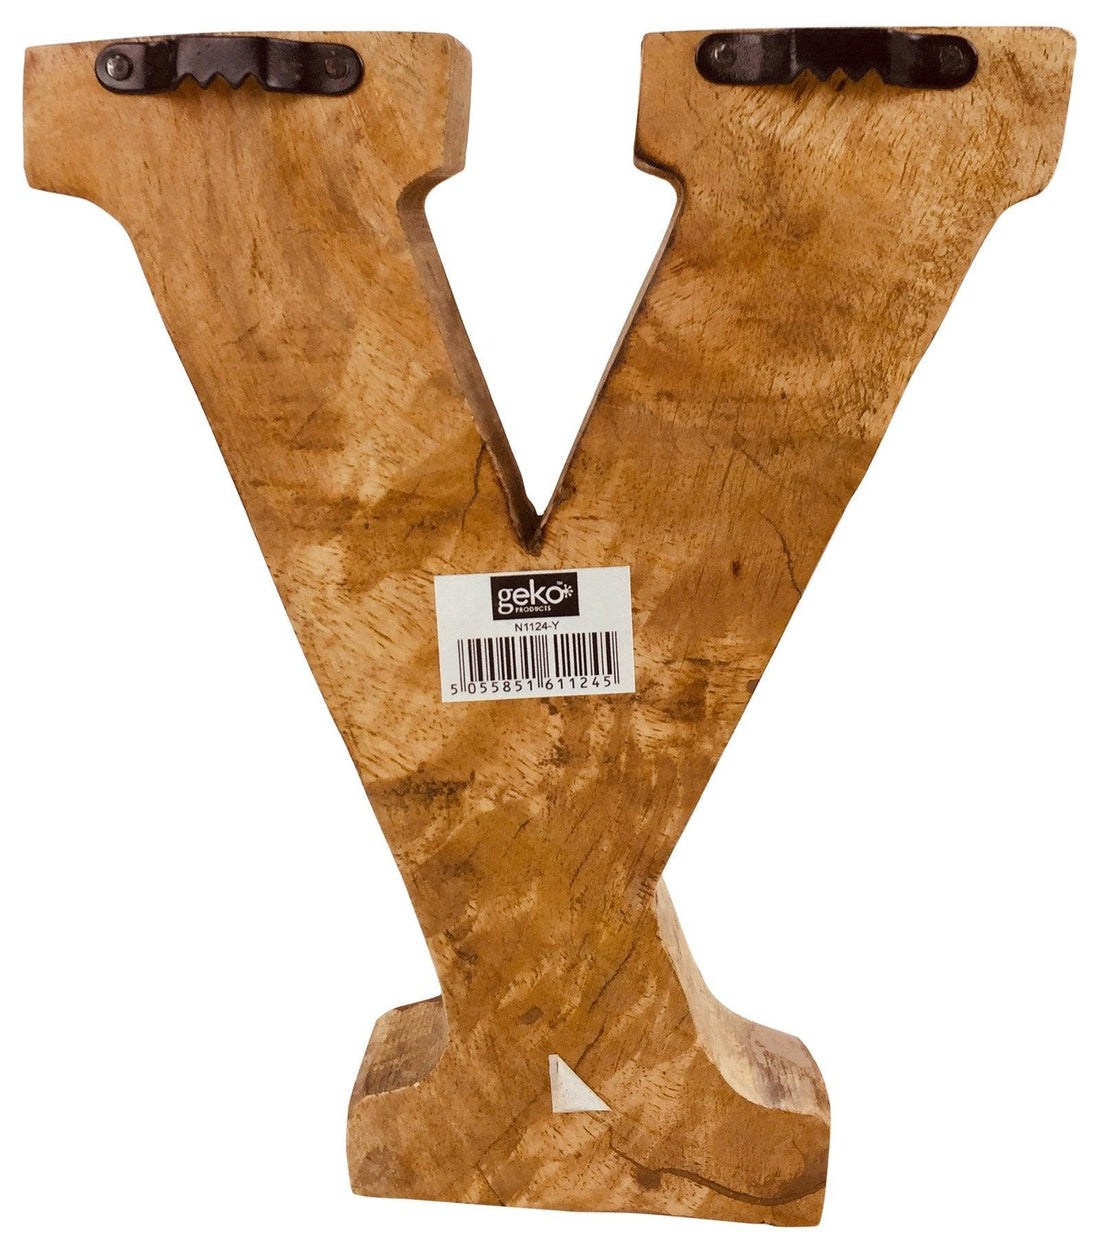 Hand Carved Wooden Embossed Letter Y - £18.99 - Single Letters 